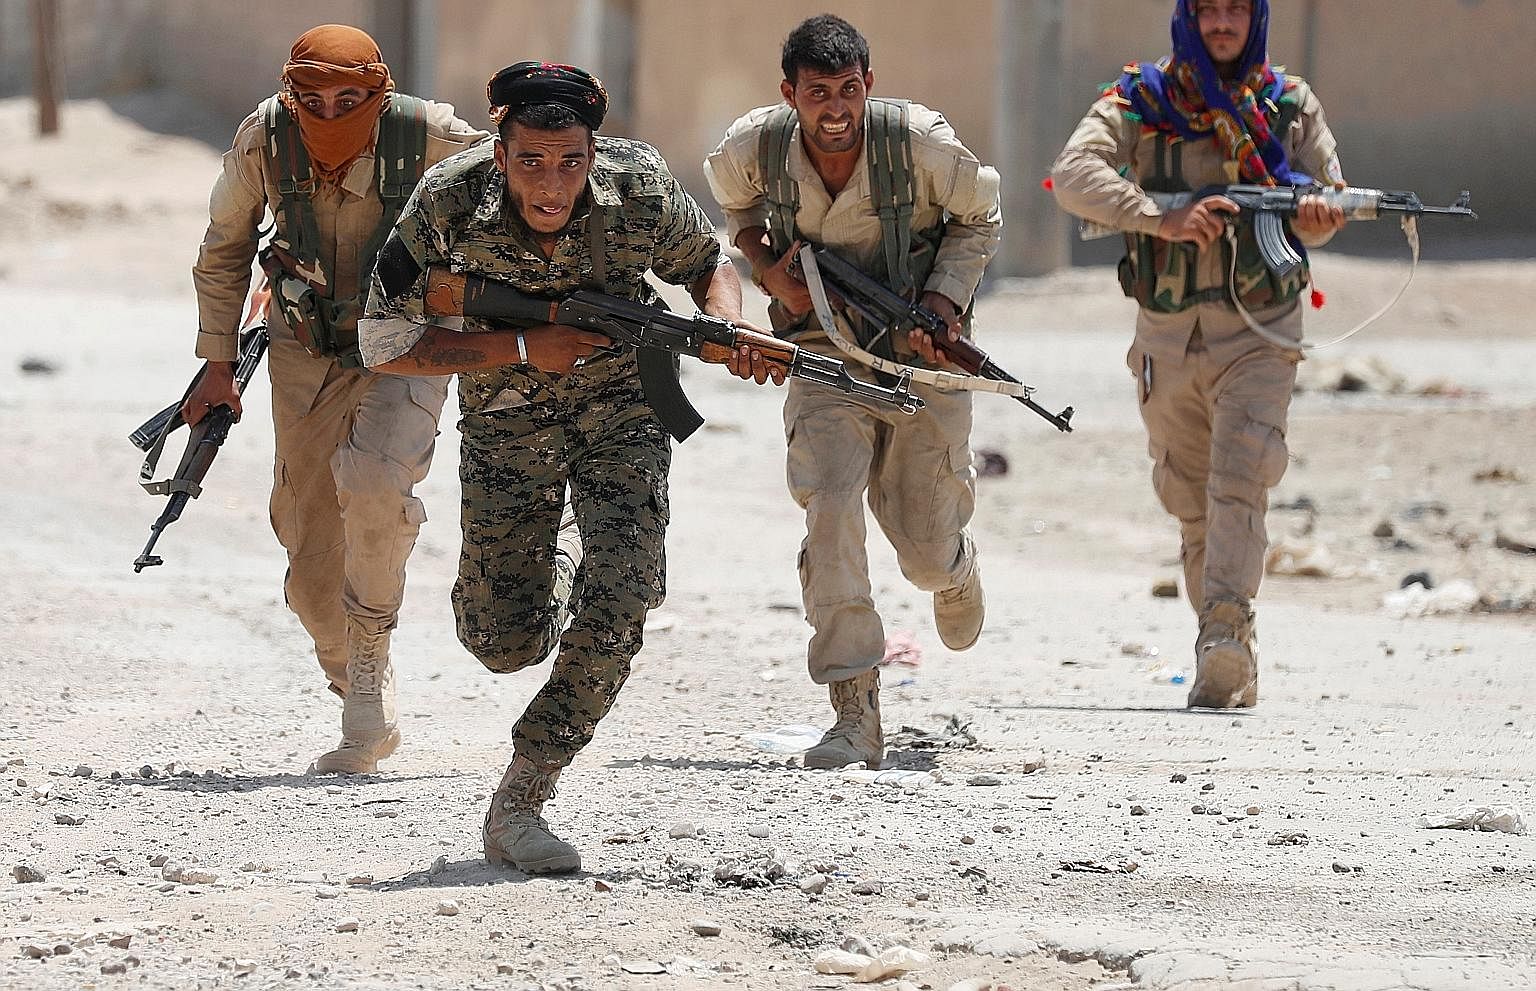 The liberation of Raqqa, Syria, is largely conducted by the Syrian Democratic Forces, a coalition of various pro-Western militia in which ethnic Kurds drawn from the People's Protection Units predominate.